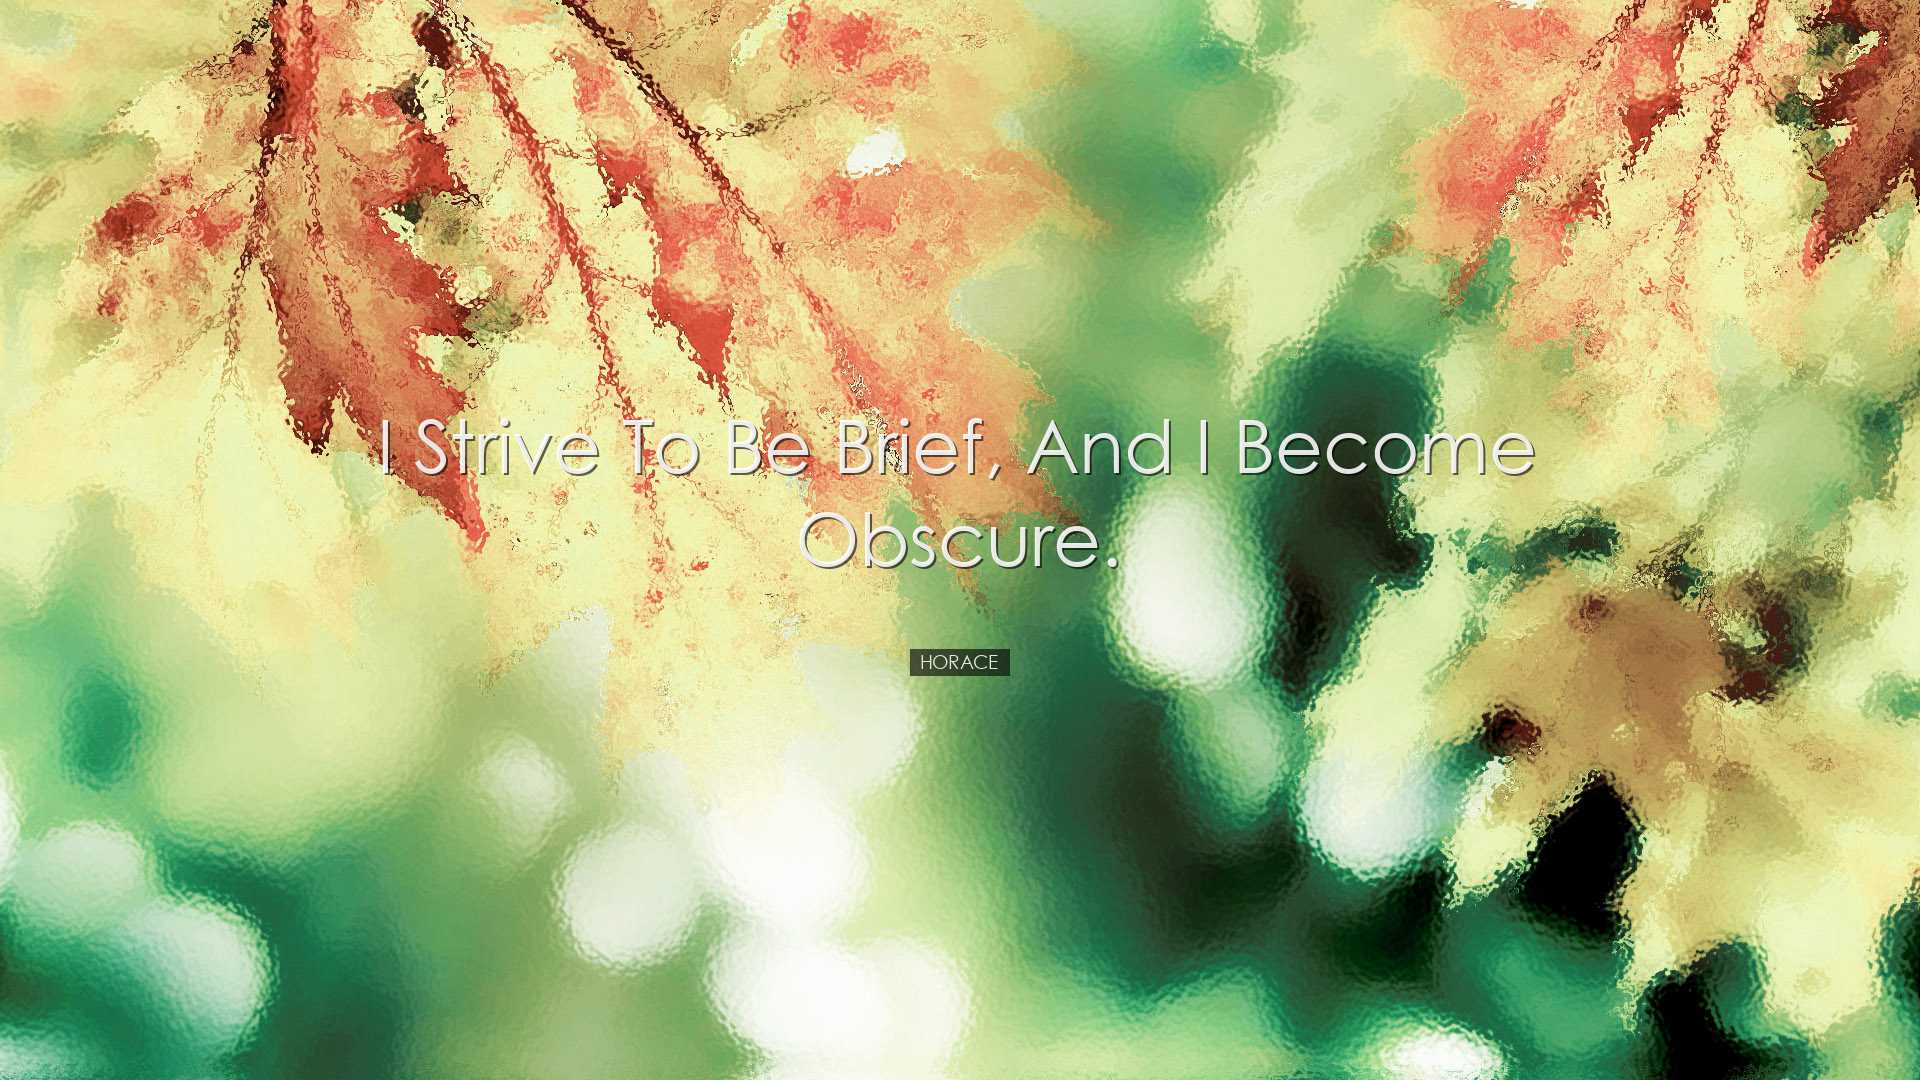 I strive to be brief, and I become obscure. - Horace